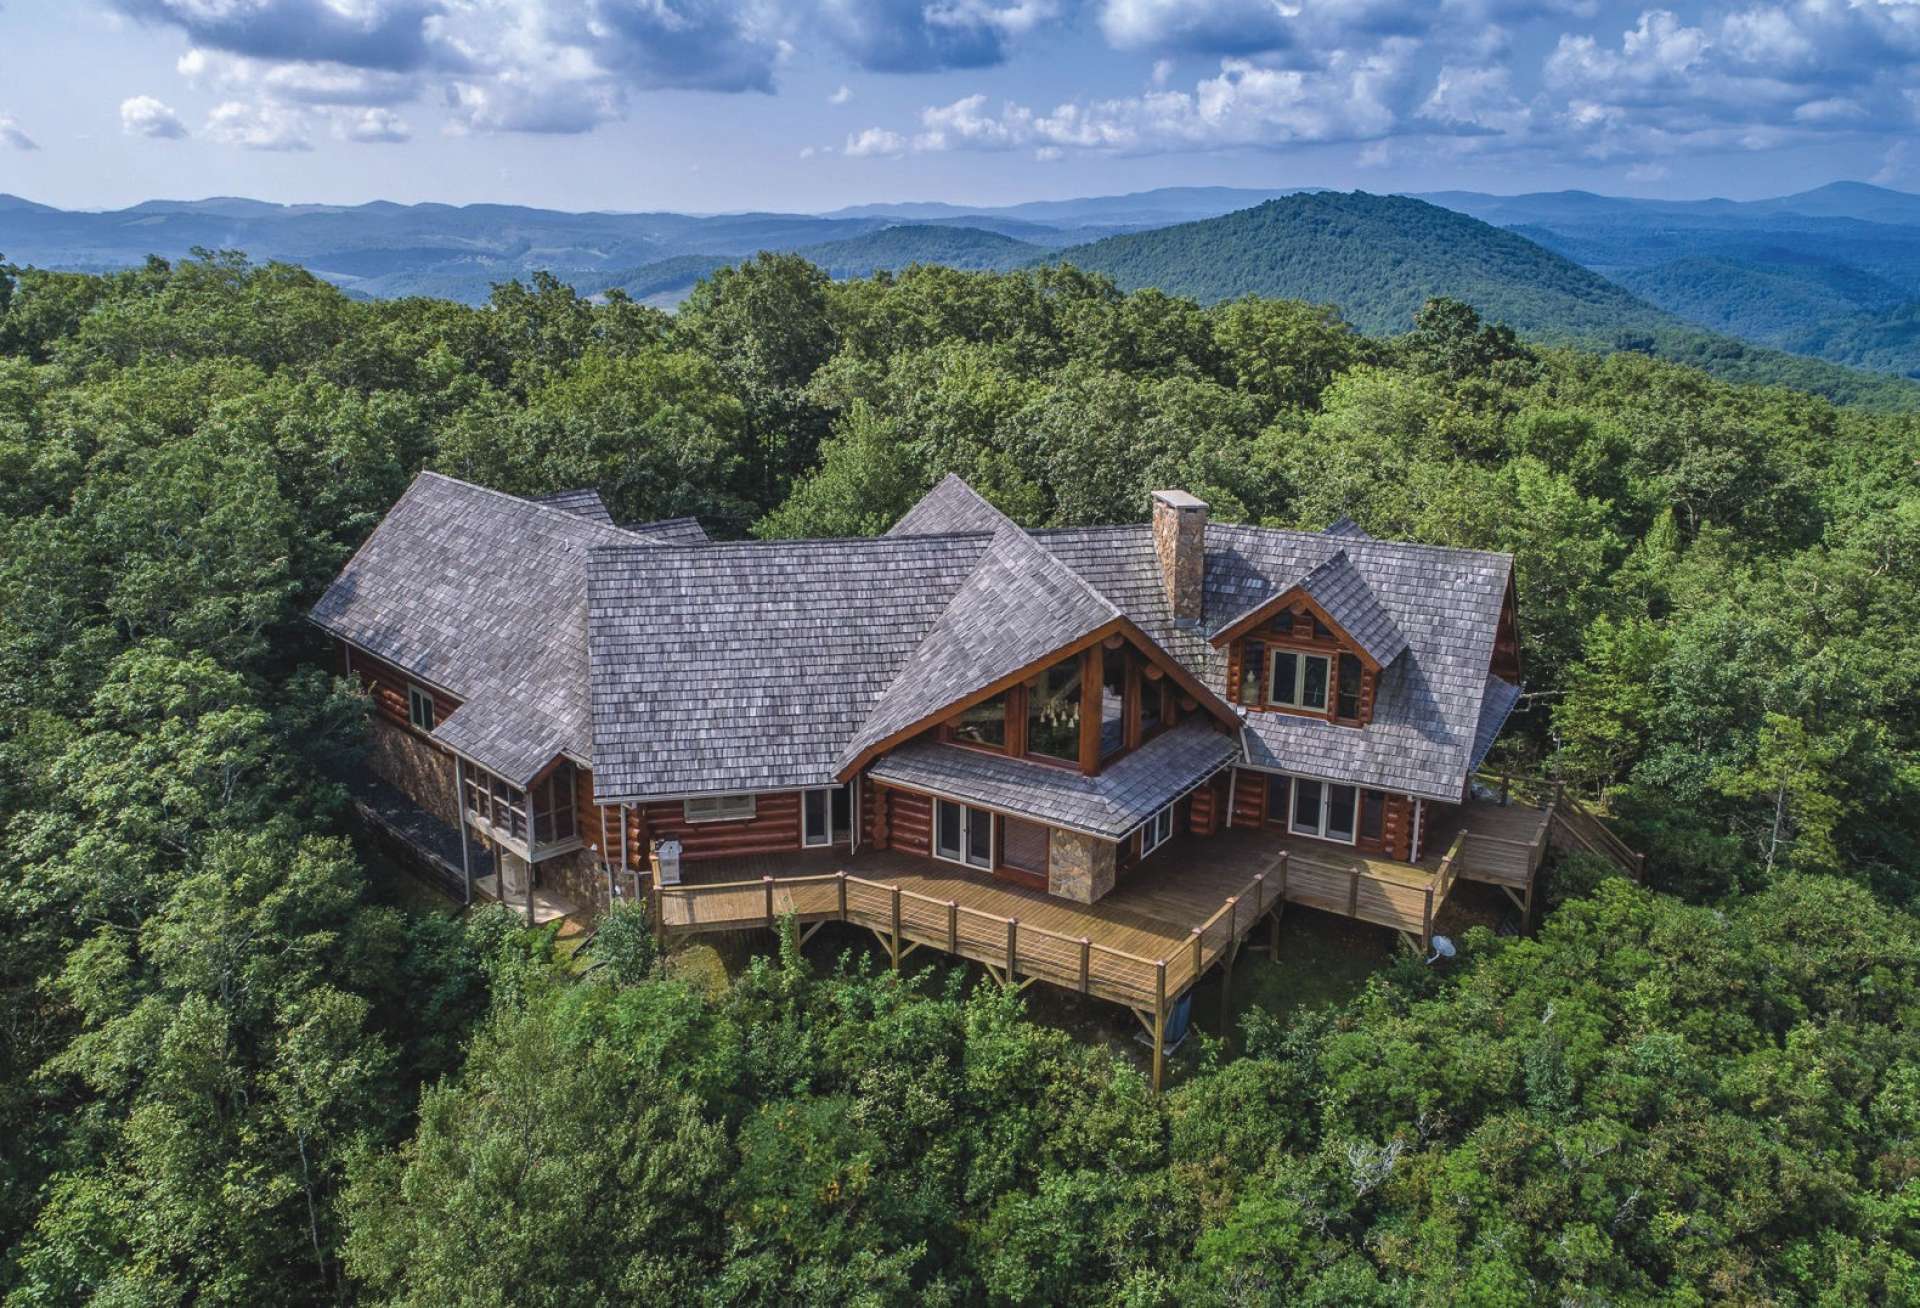 This one-of-a-kind mountain property is truly the ultimate mountaintop retreat or estate offered at $1,350,000 and includes the Architectural pleasing log home with 3 stone fireplaces, vast windows showcasing fabulous long range mountain vista views, 3-car garage, guest house, both homes offered furnished, and a private wooded 19.06 acre setting in the Laurel Mountain Estates community of the Todd area of Southern Ashe County. If you are looking for an extraordinary mountain property, call for more information on listing B160.